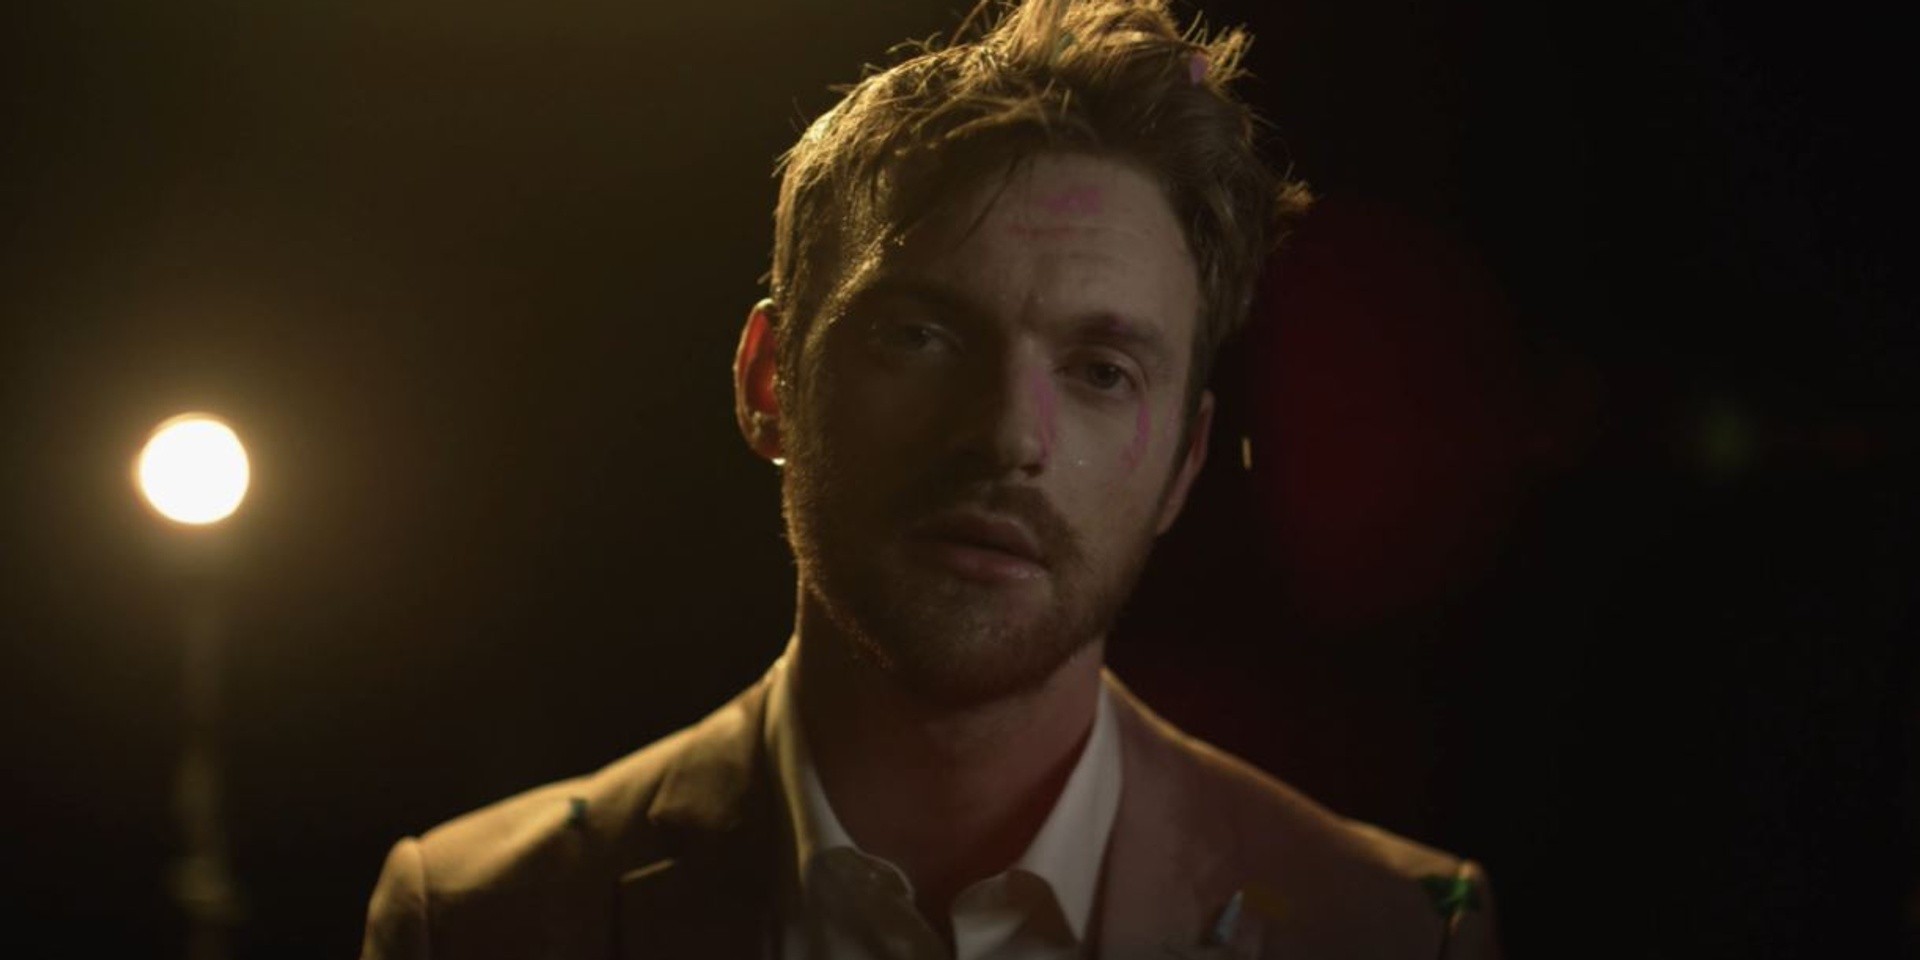 "Dedicated to all who have had to endure this year": FINNEAS returns with powerful single 'What They’ll Say About Us' – watch